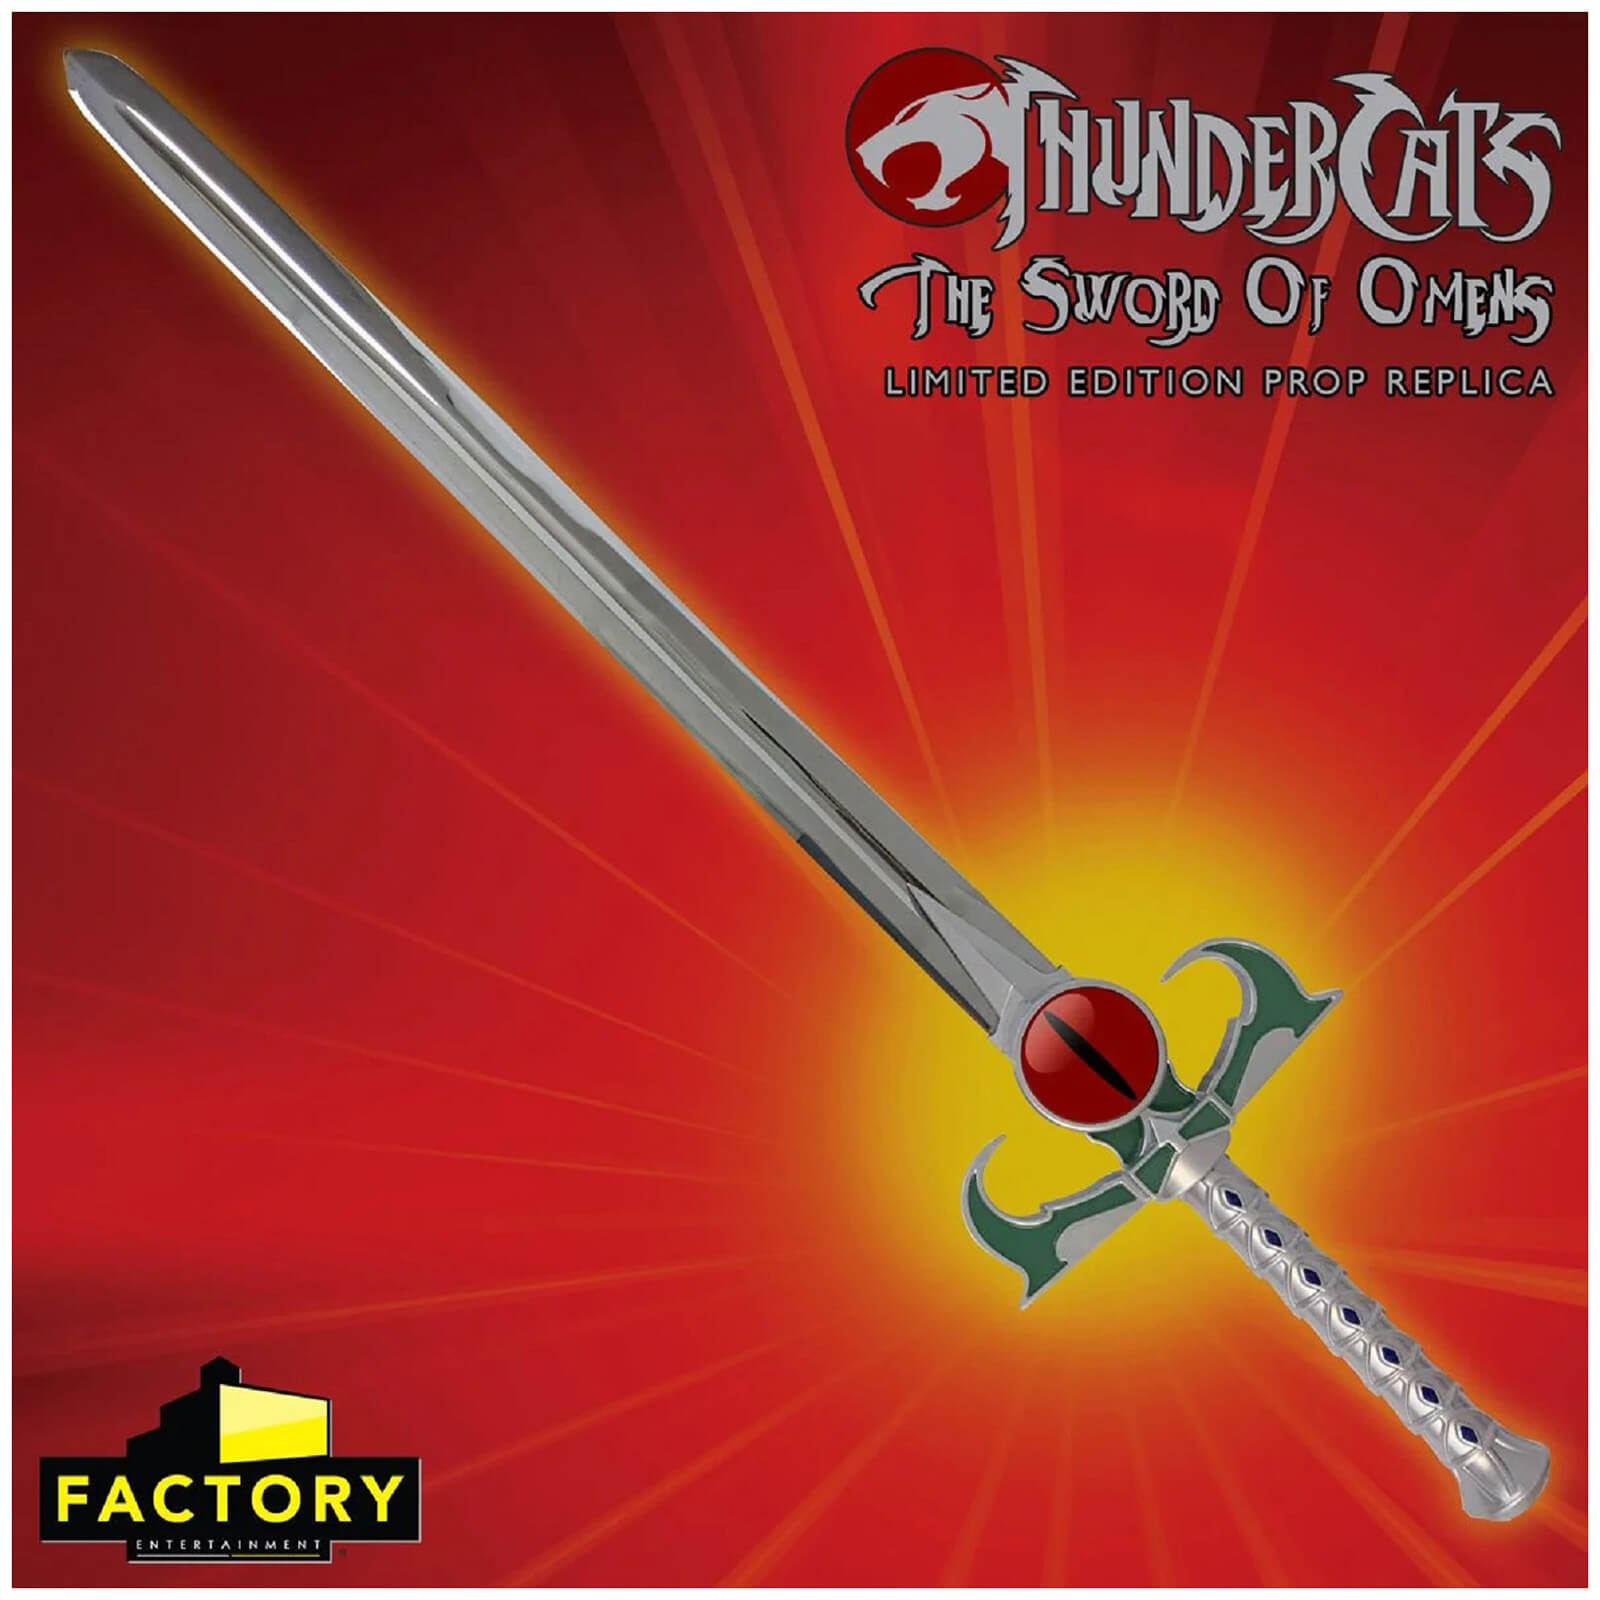 Image of the Thunder Cats sword. Text on the image reads, Thunder Cats The Sword Of Omens, Limited Edition Prop Replica. Factory Entertainment.